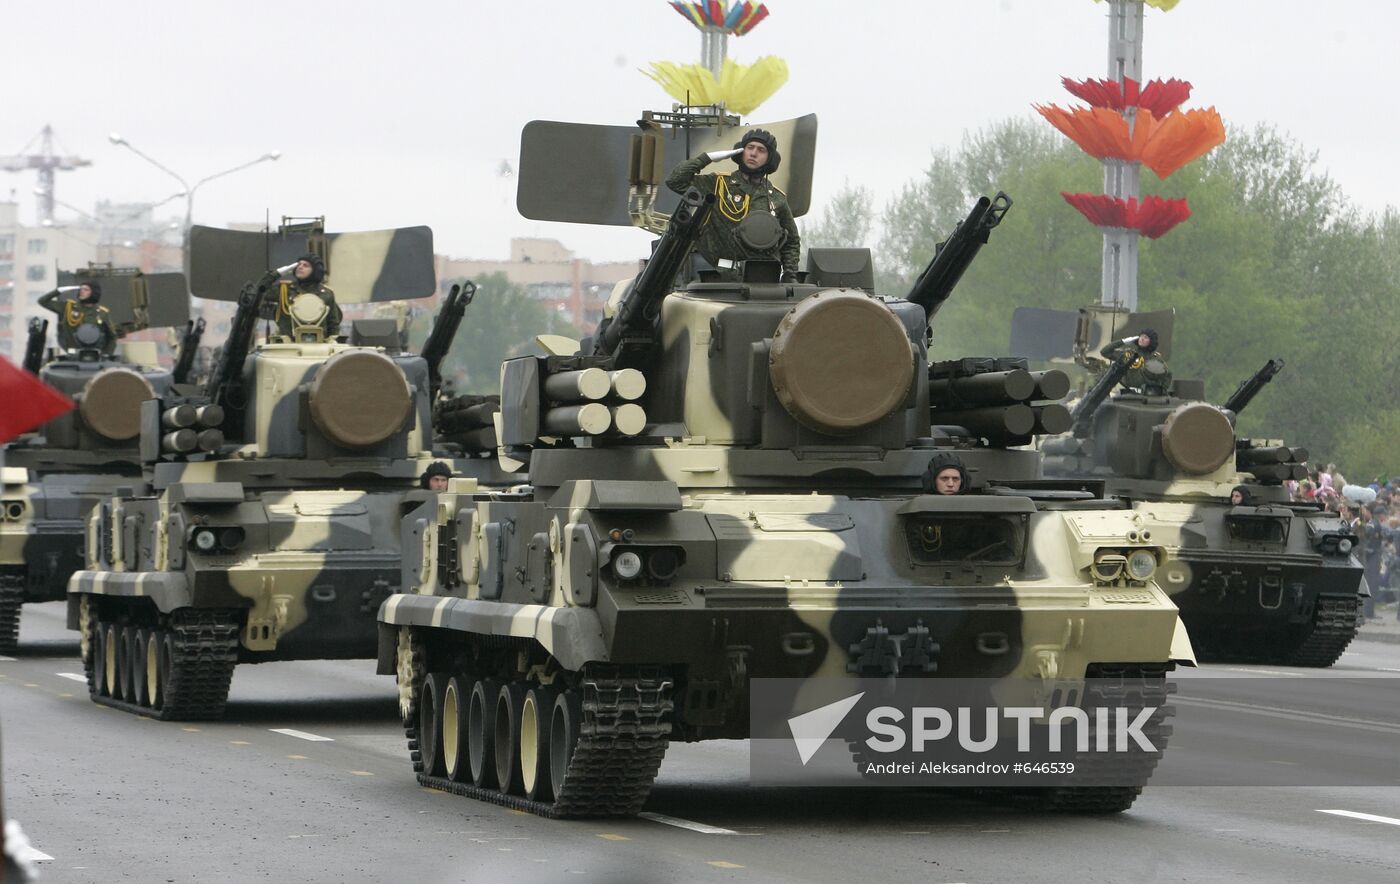 Victory Day celebrations in CIS countries